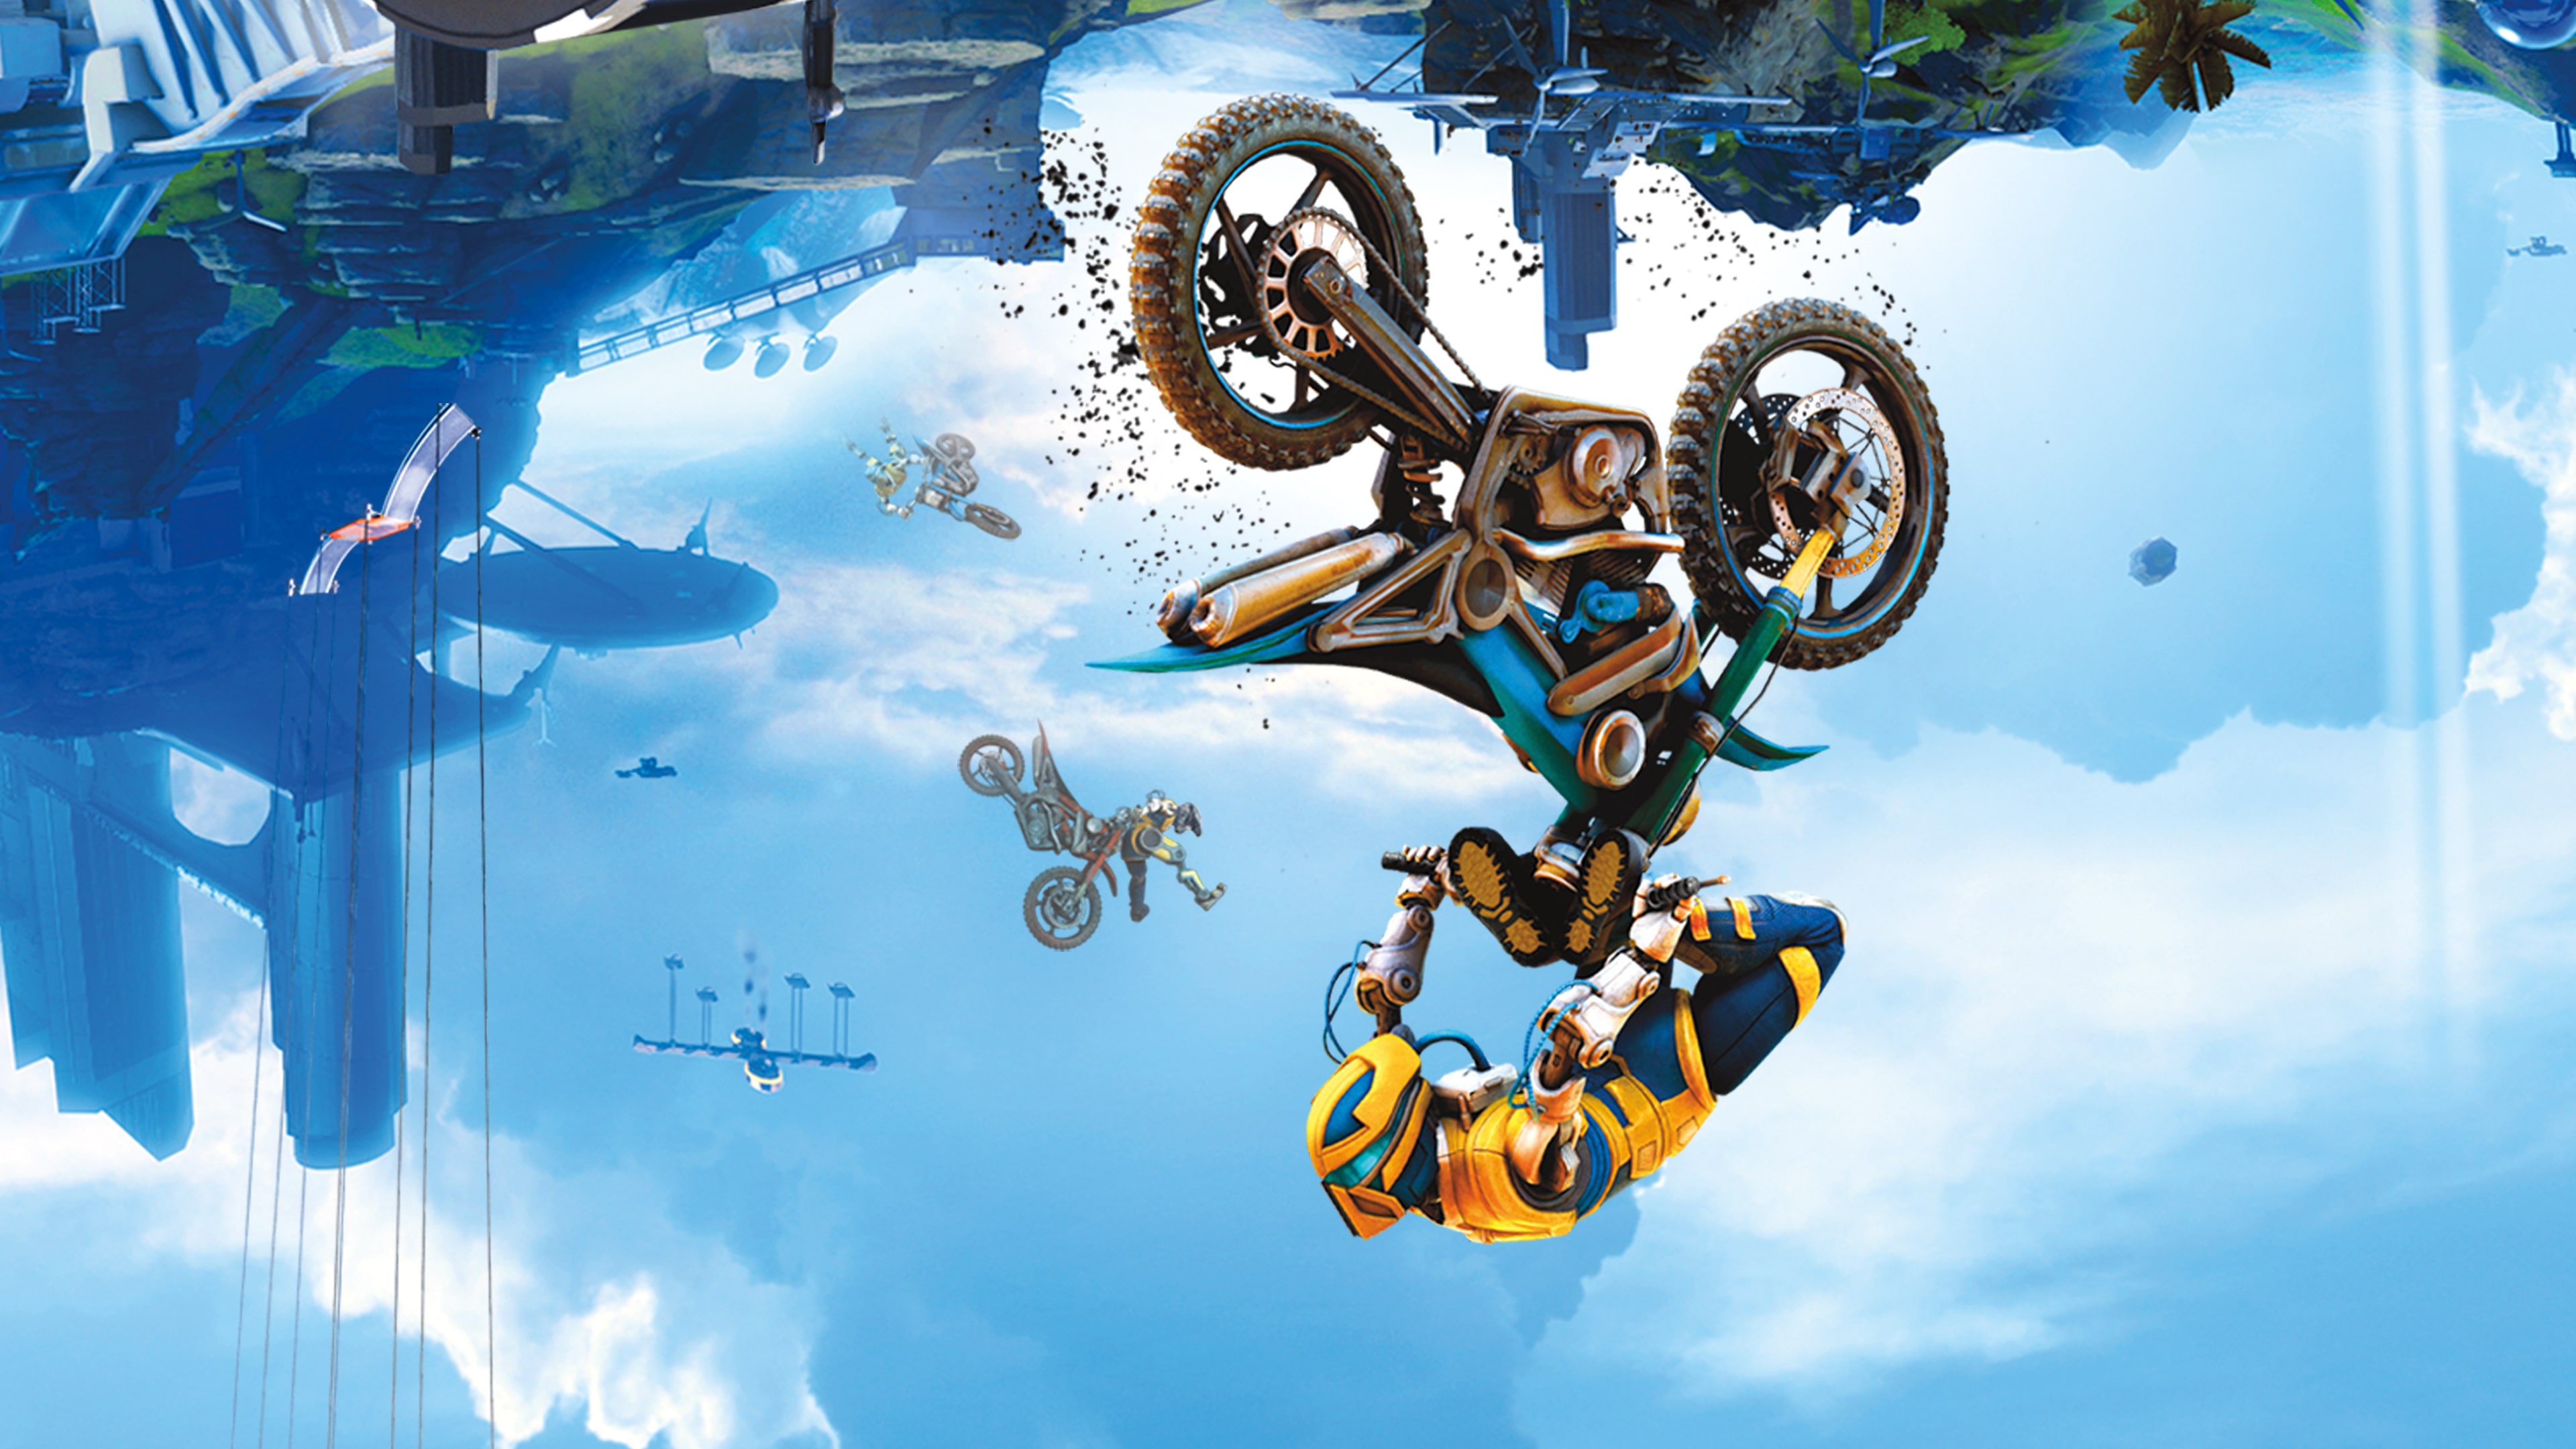 trials fusion game of the year